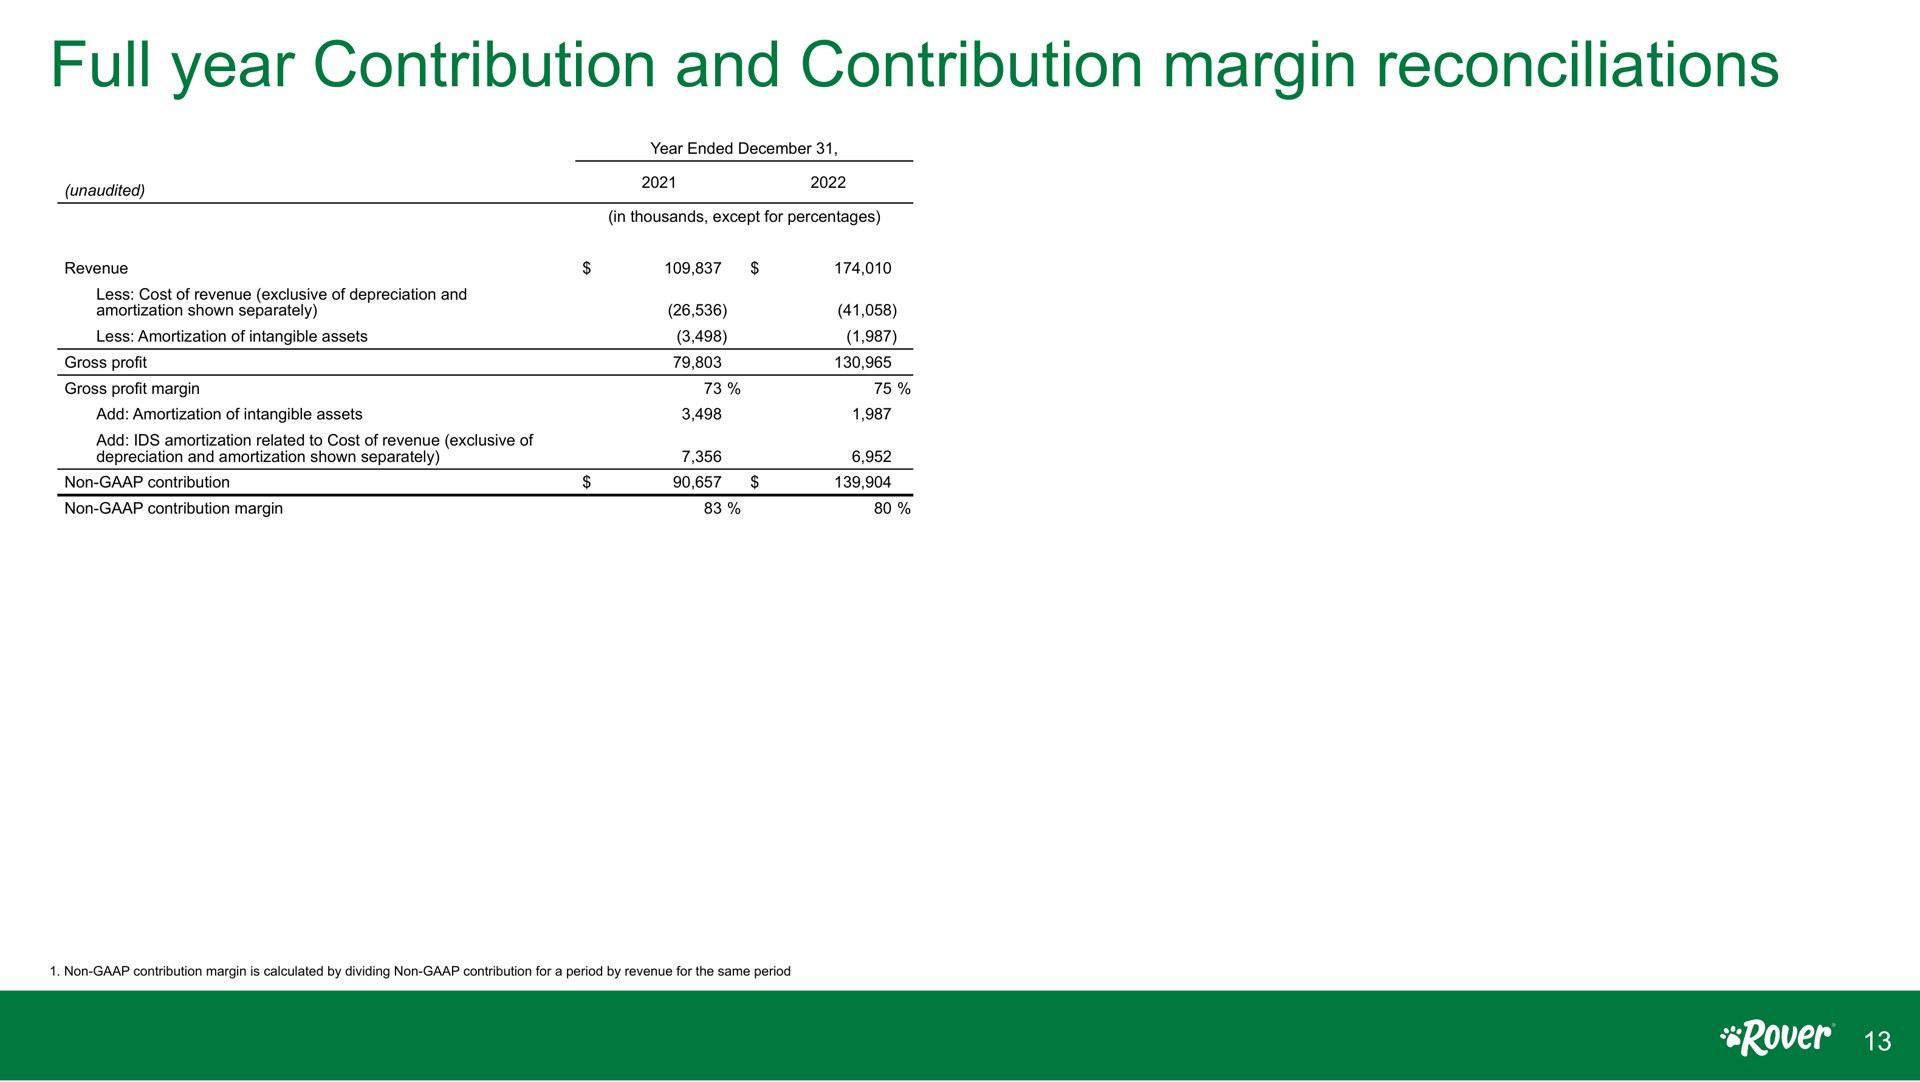 full year contribution and contribution margin reconciliations | Rover